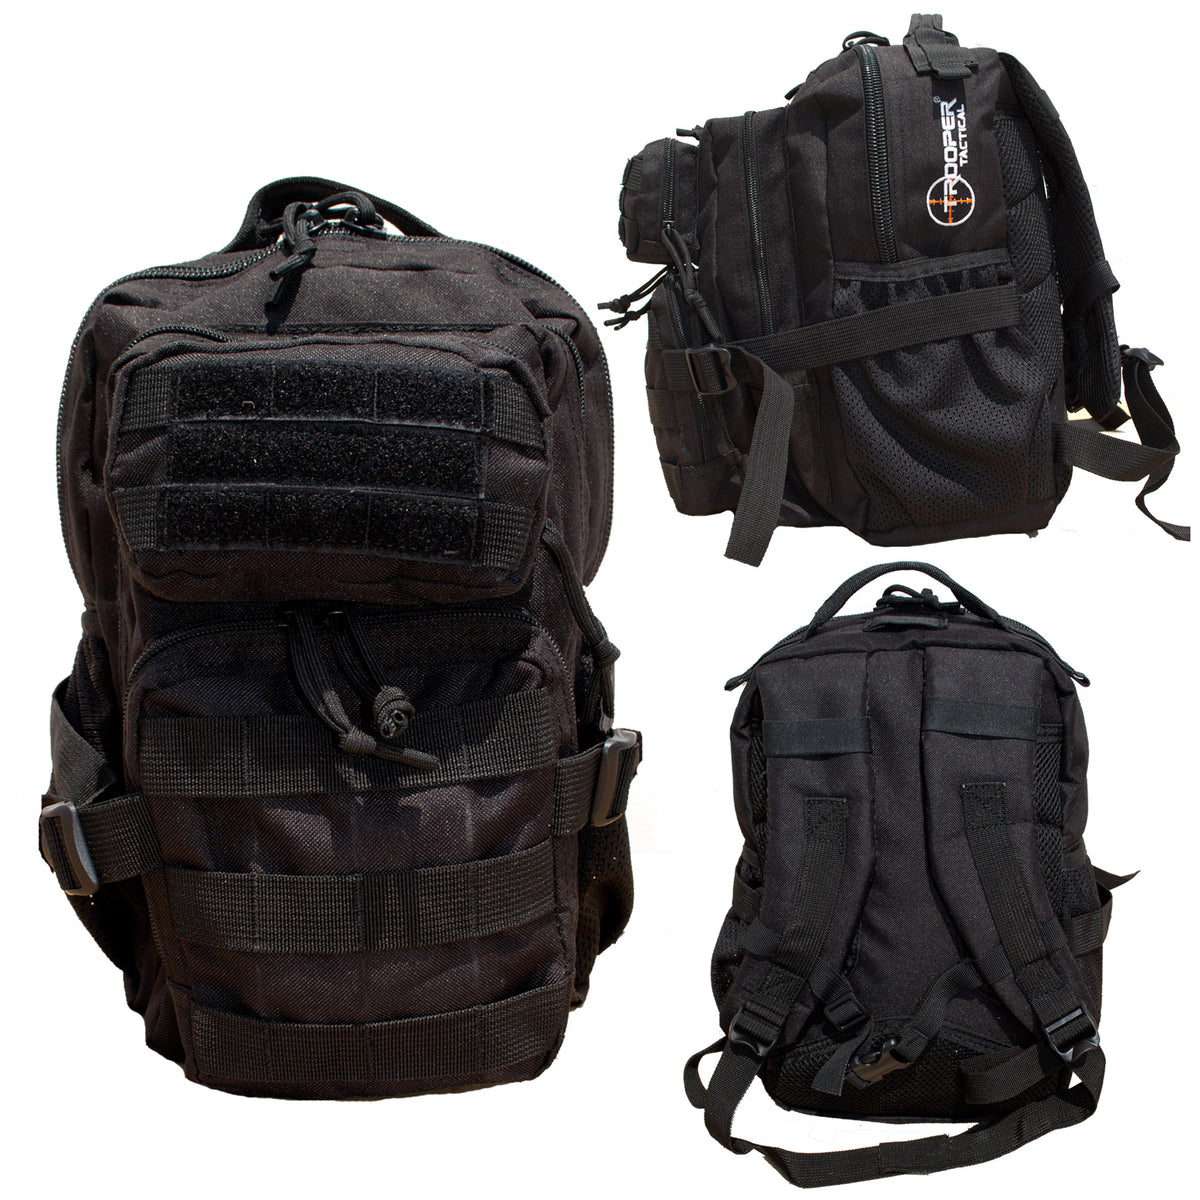 Kids Recon Tactical Backpack with Customized Name Tape Option!